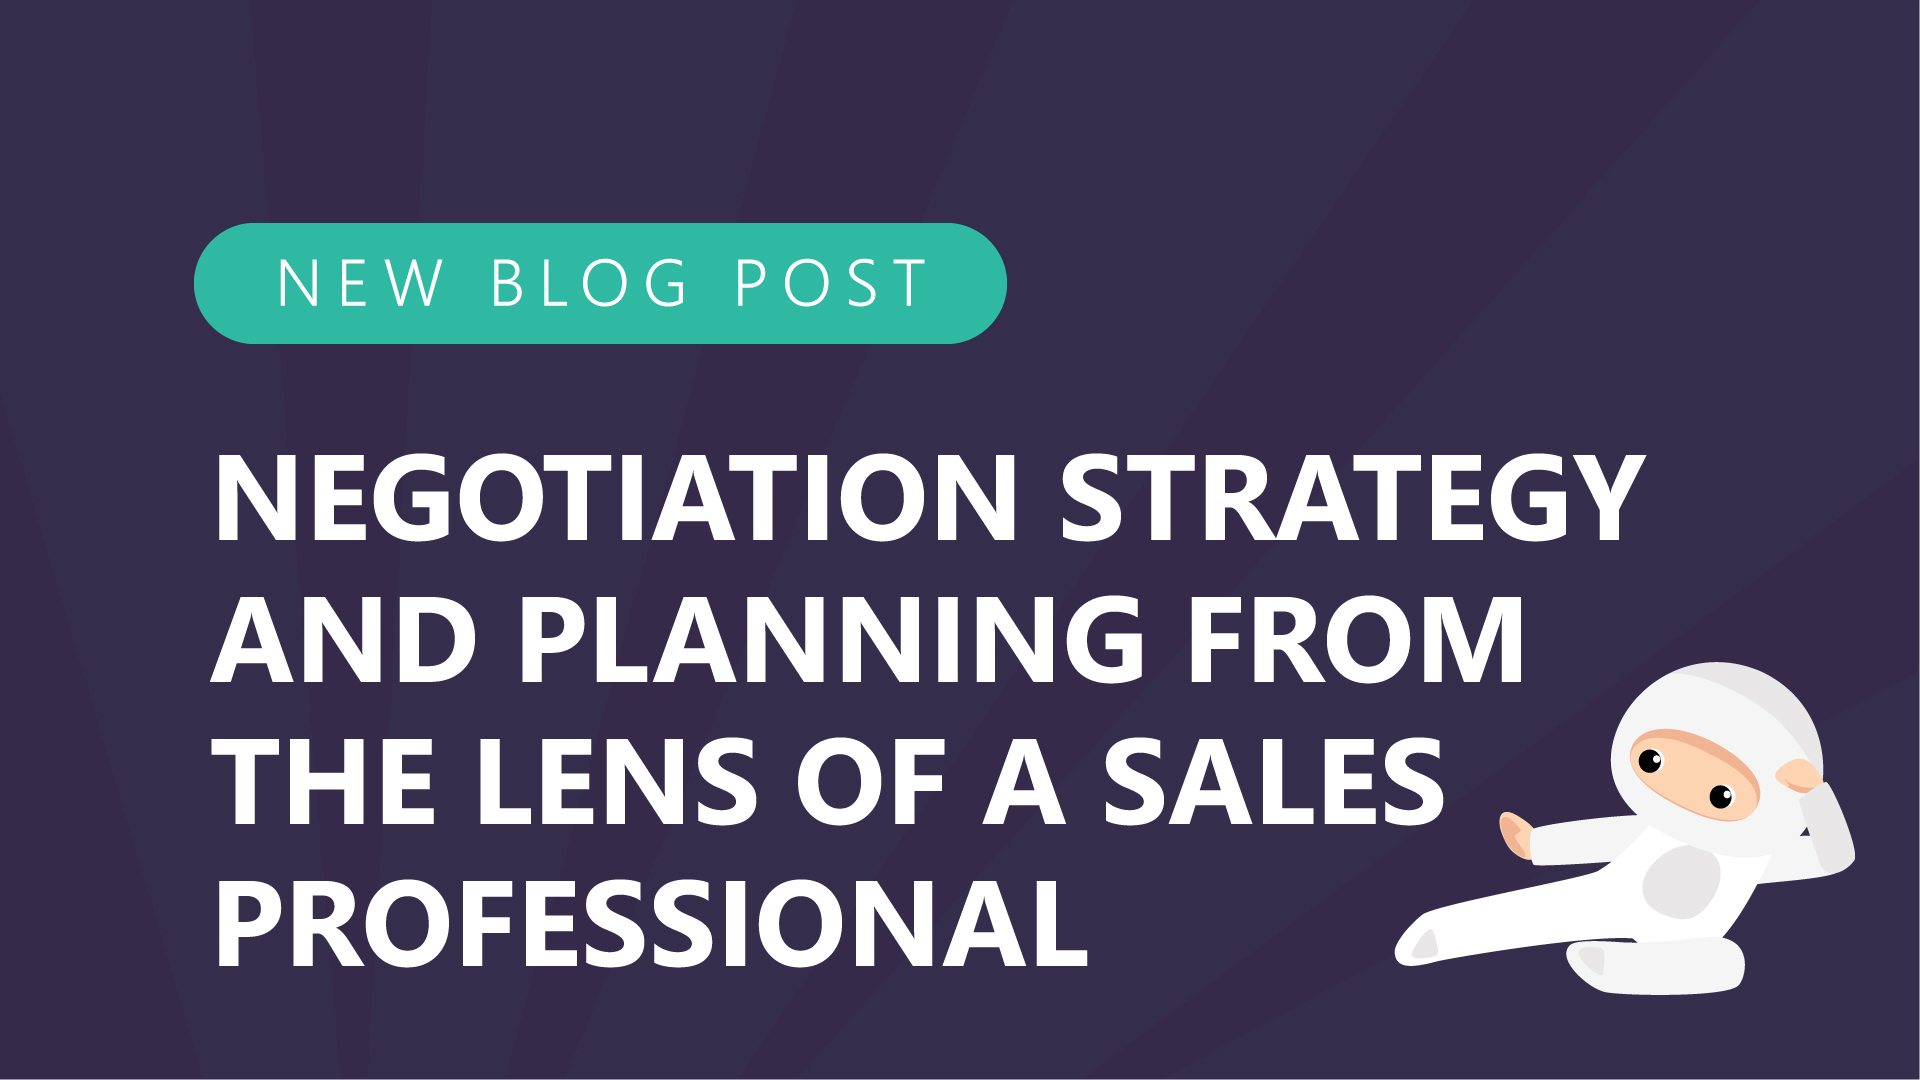 78-Negotiation-Strategy-and-Planning-From-the-Lens-of-a-Sales-Professional.jpg